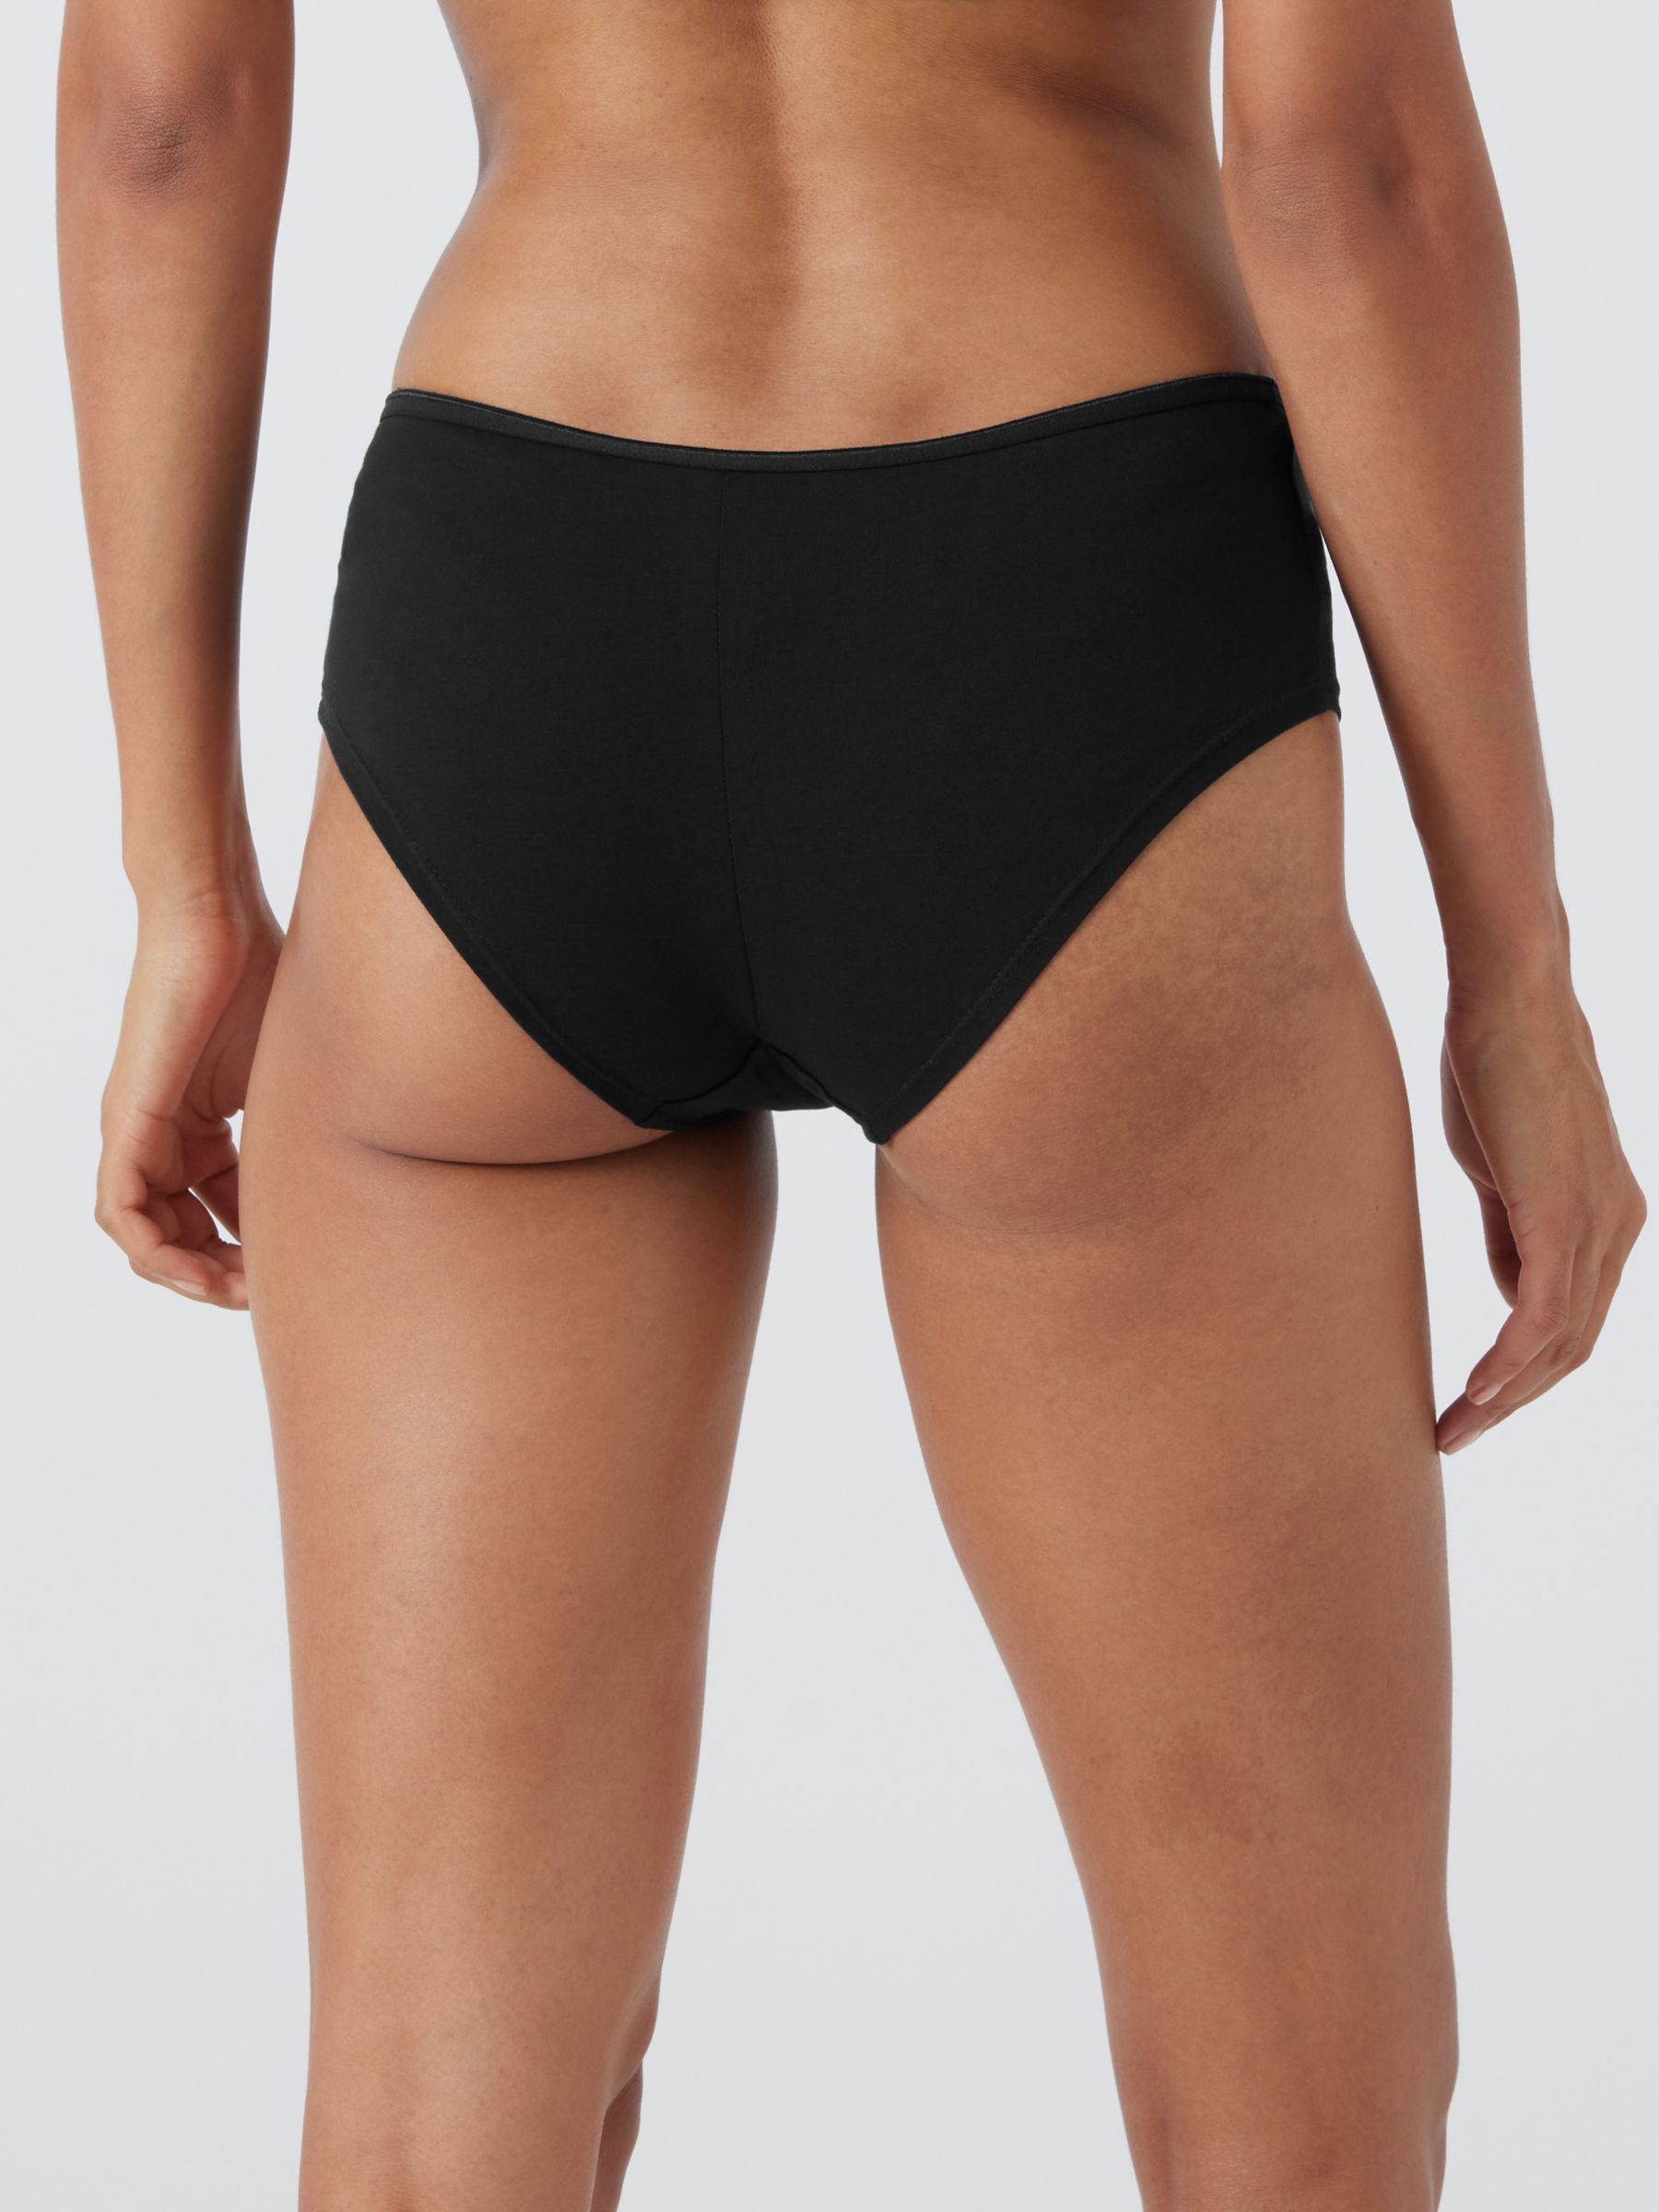 Buy John Lewis Cotton Blend Short Knickers, Pack of 5, White/Almond/Black Online at johnlewis.com